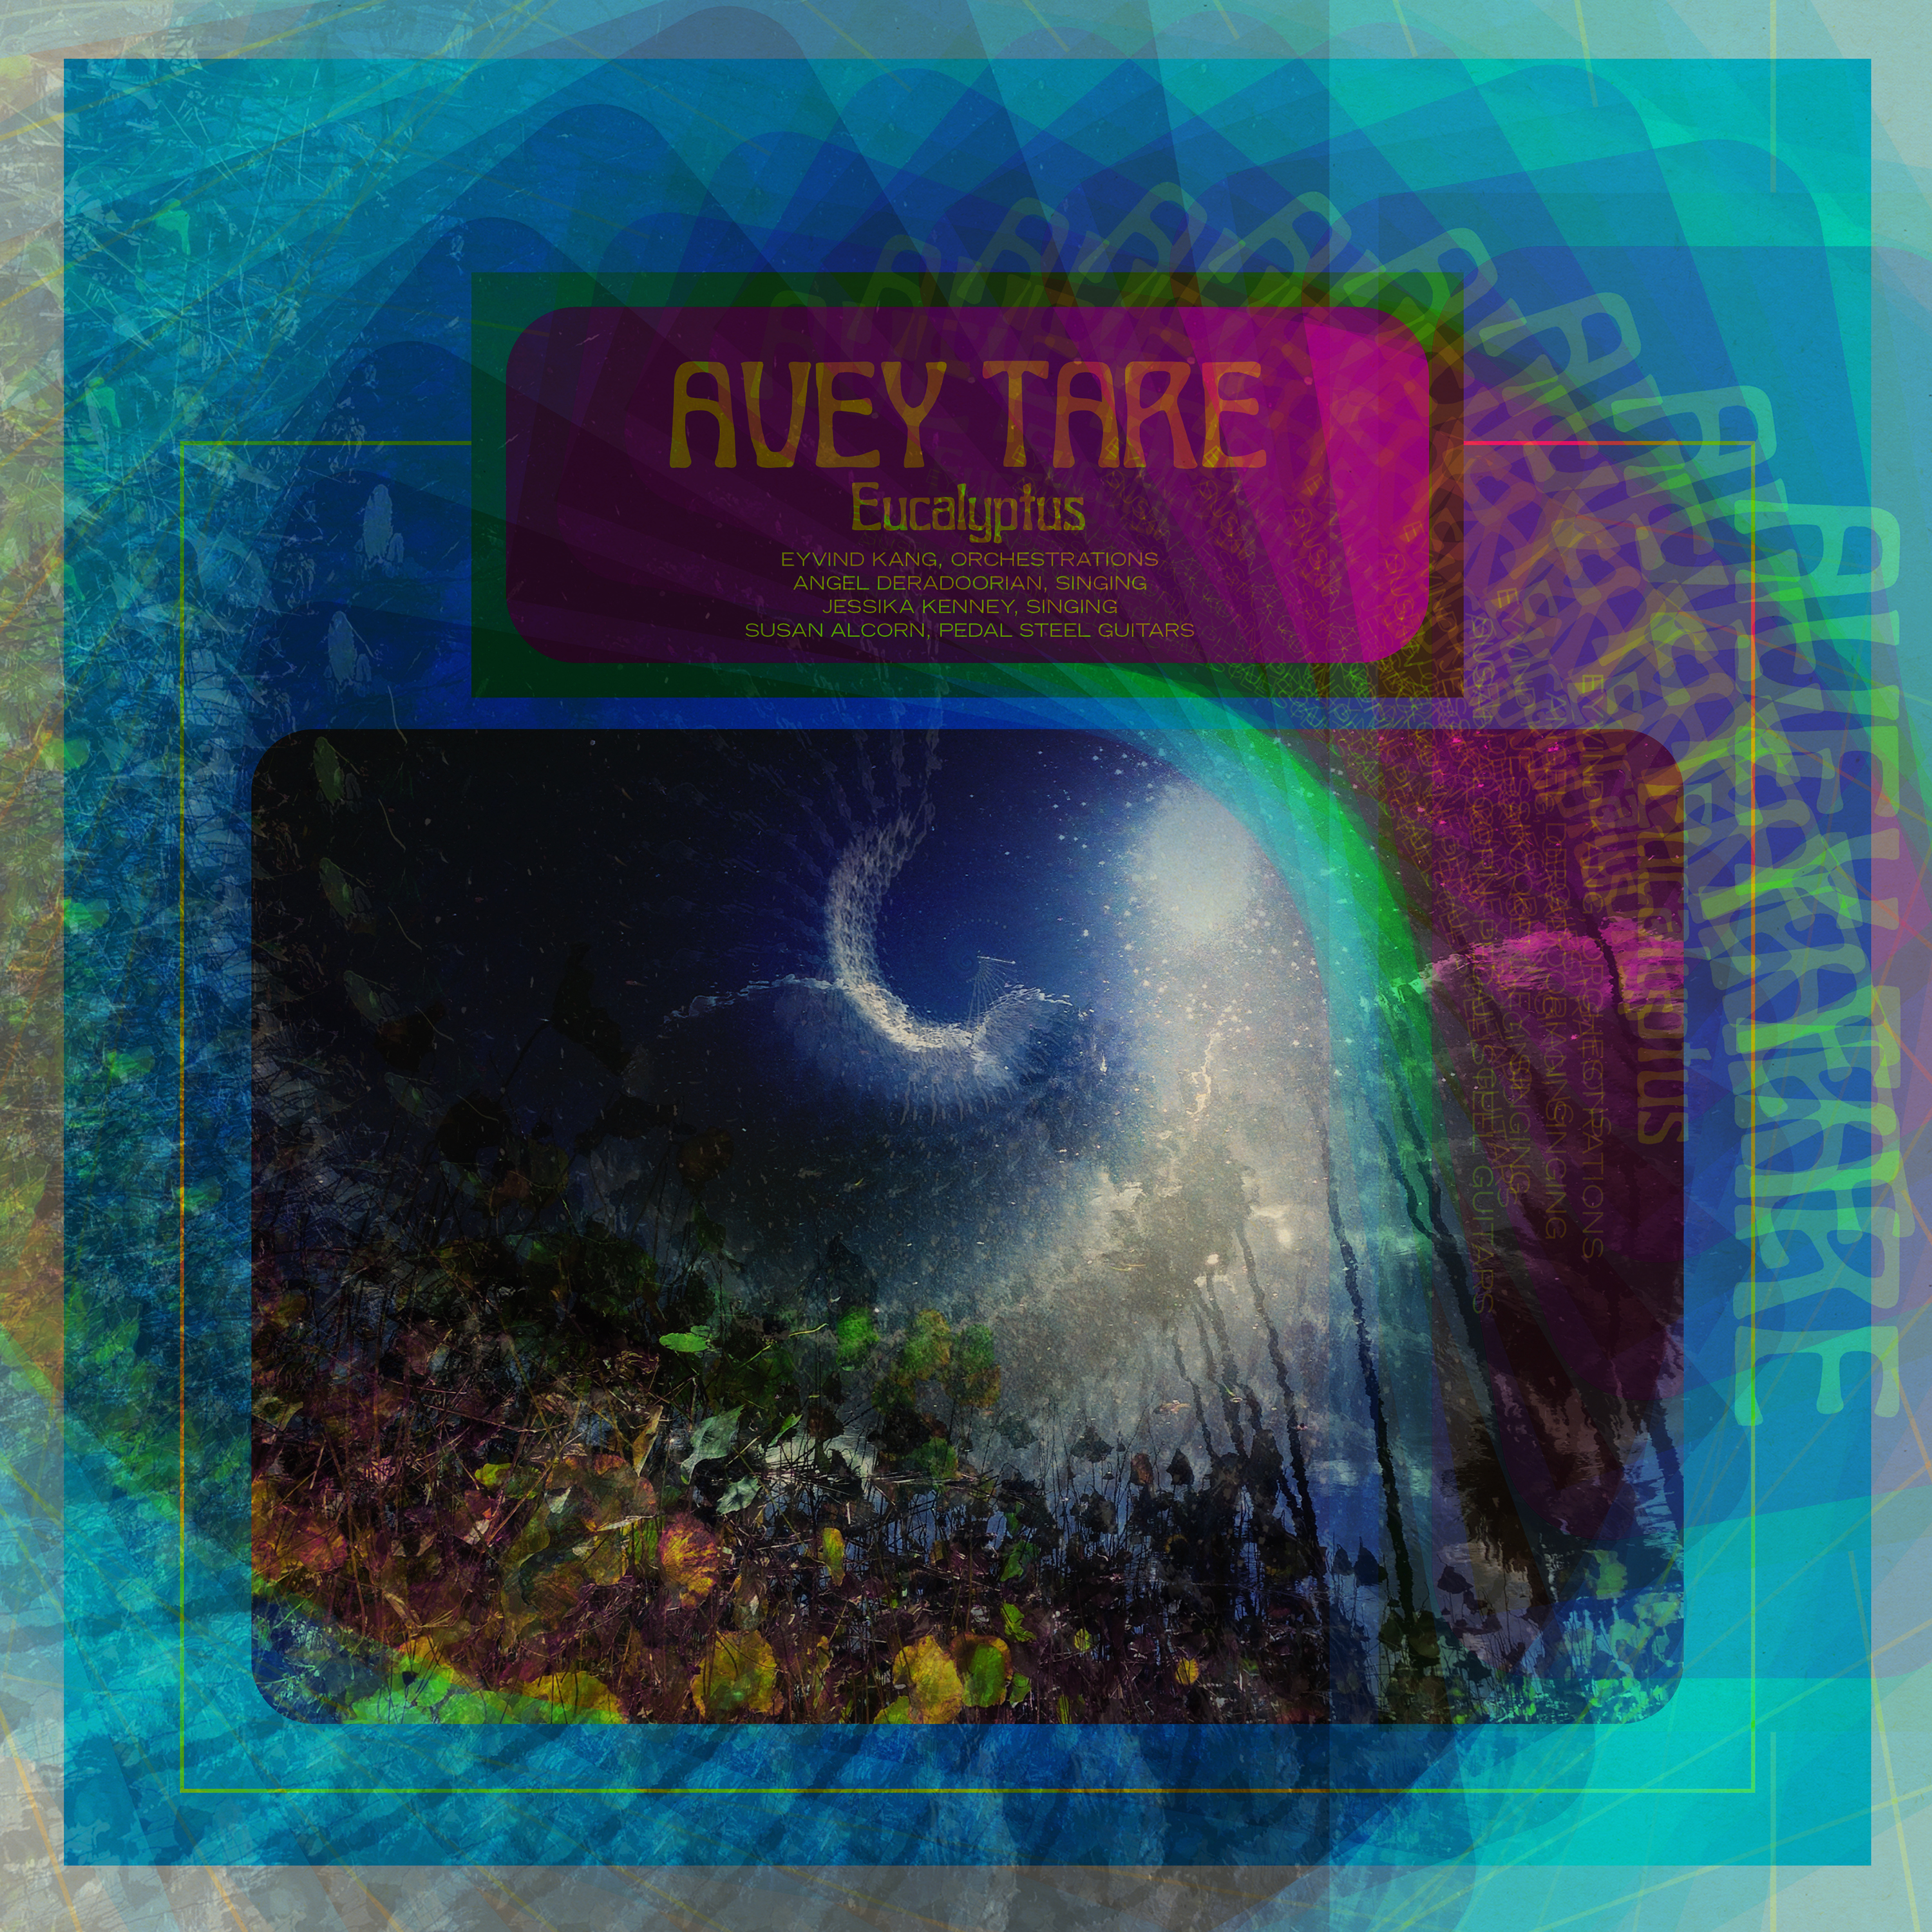 Our review of Avey Tare's 'Eucalyptus'